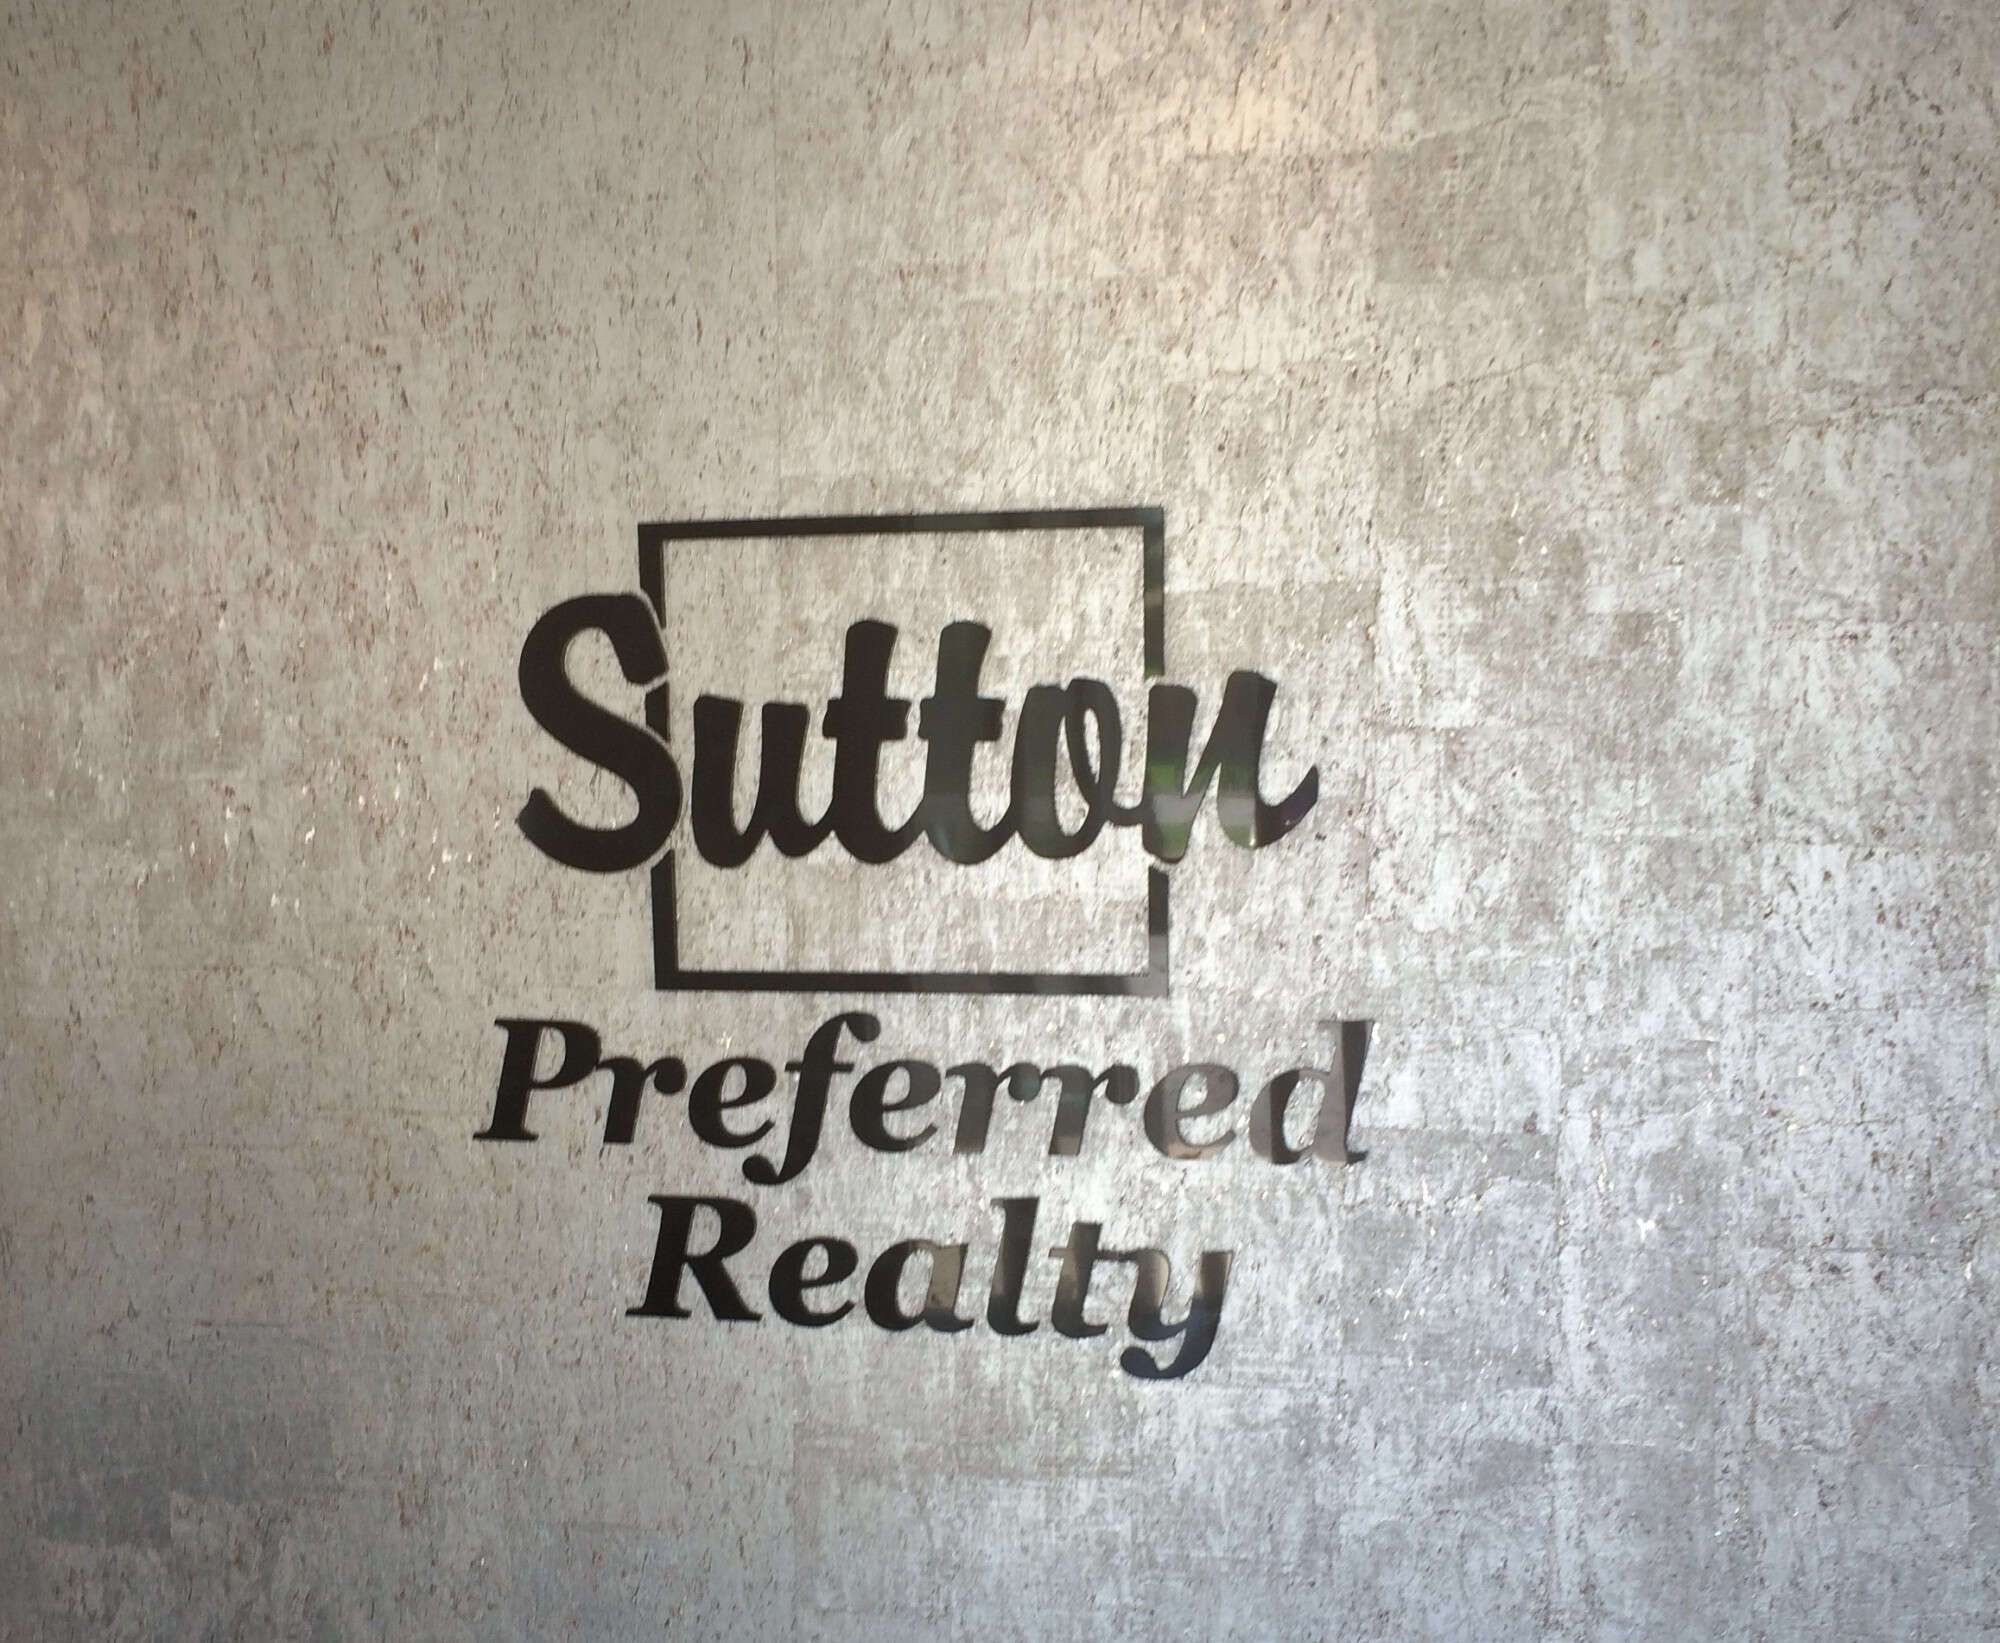 Sutton Group Preferred Realty Inc.